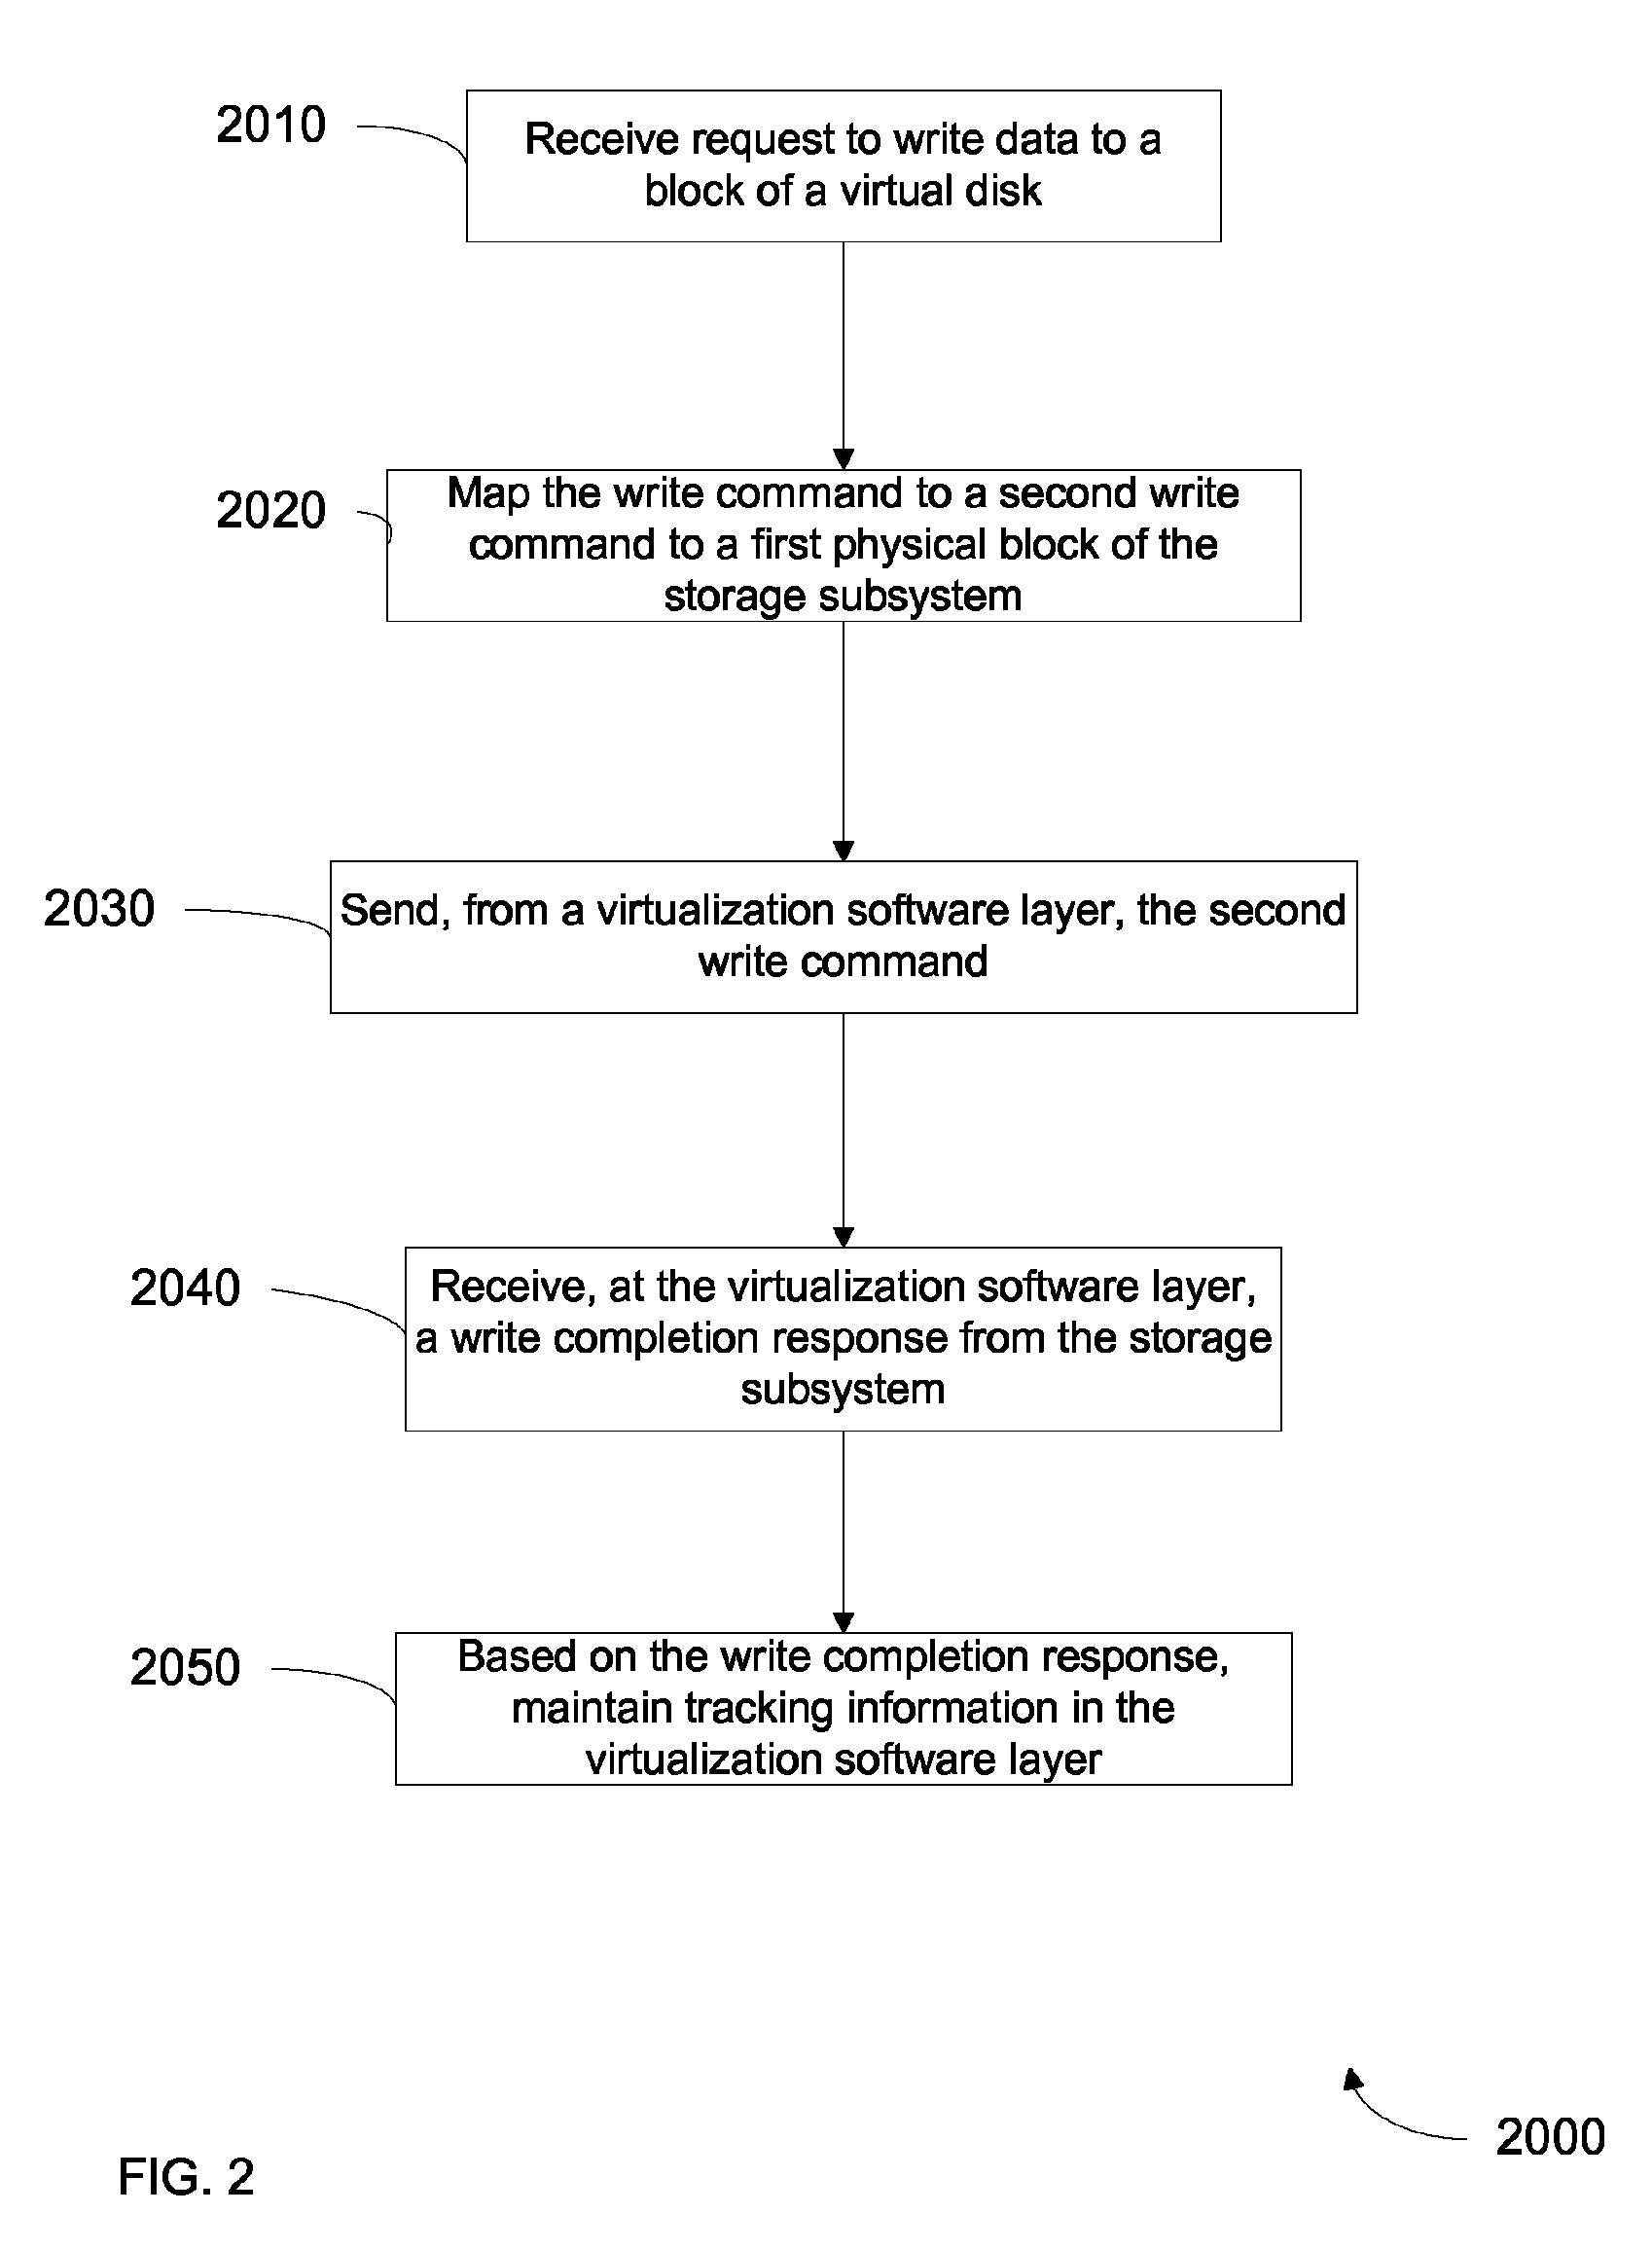 Method for tracking changes in virtual disks